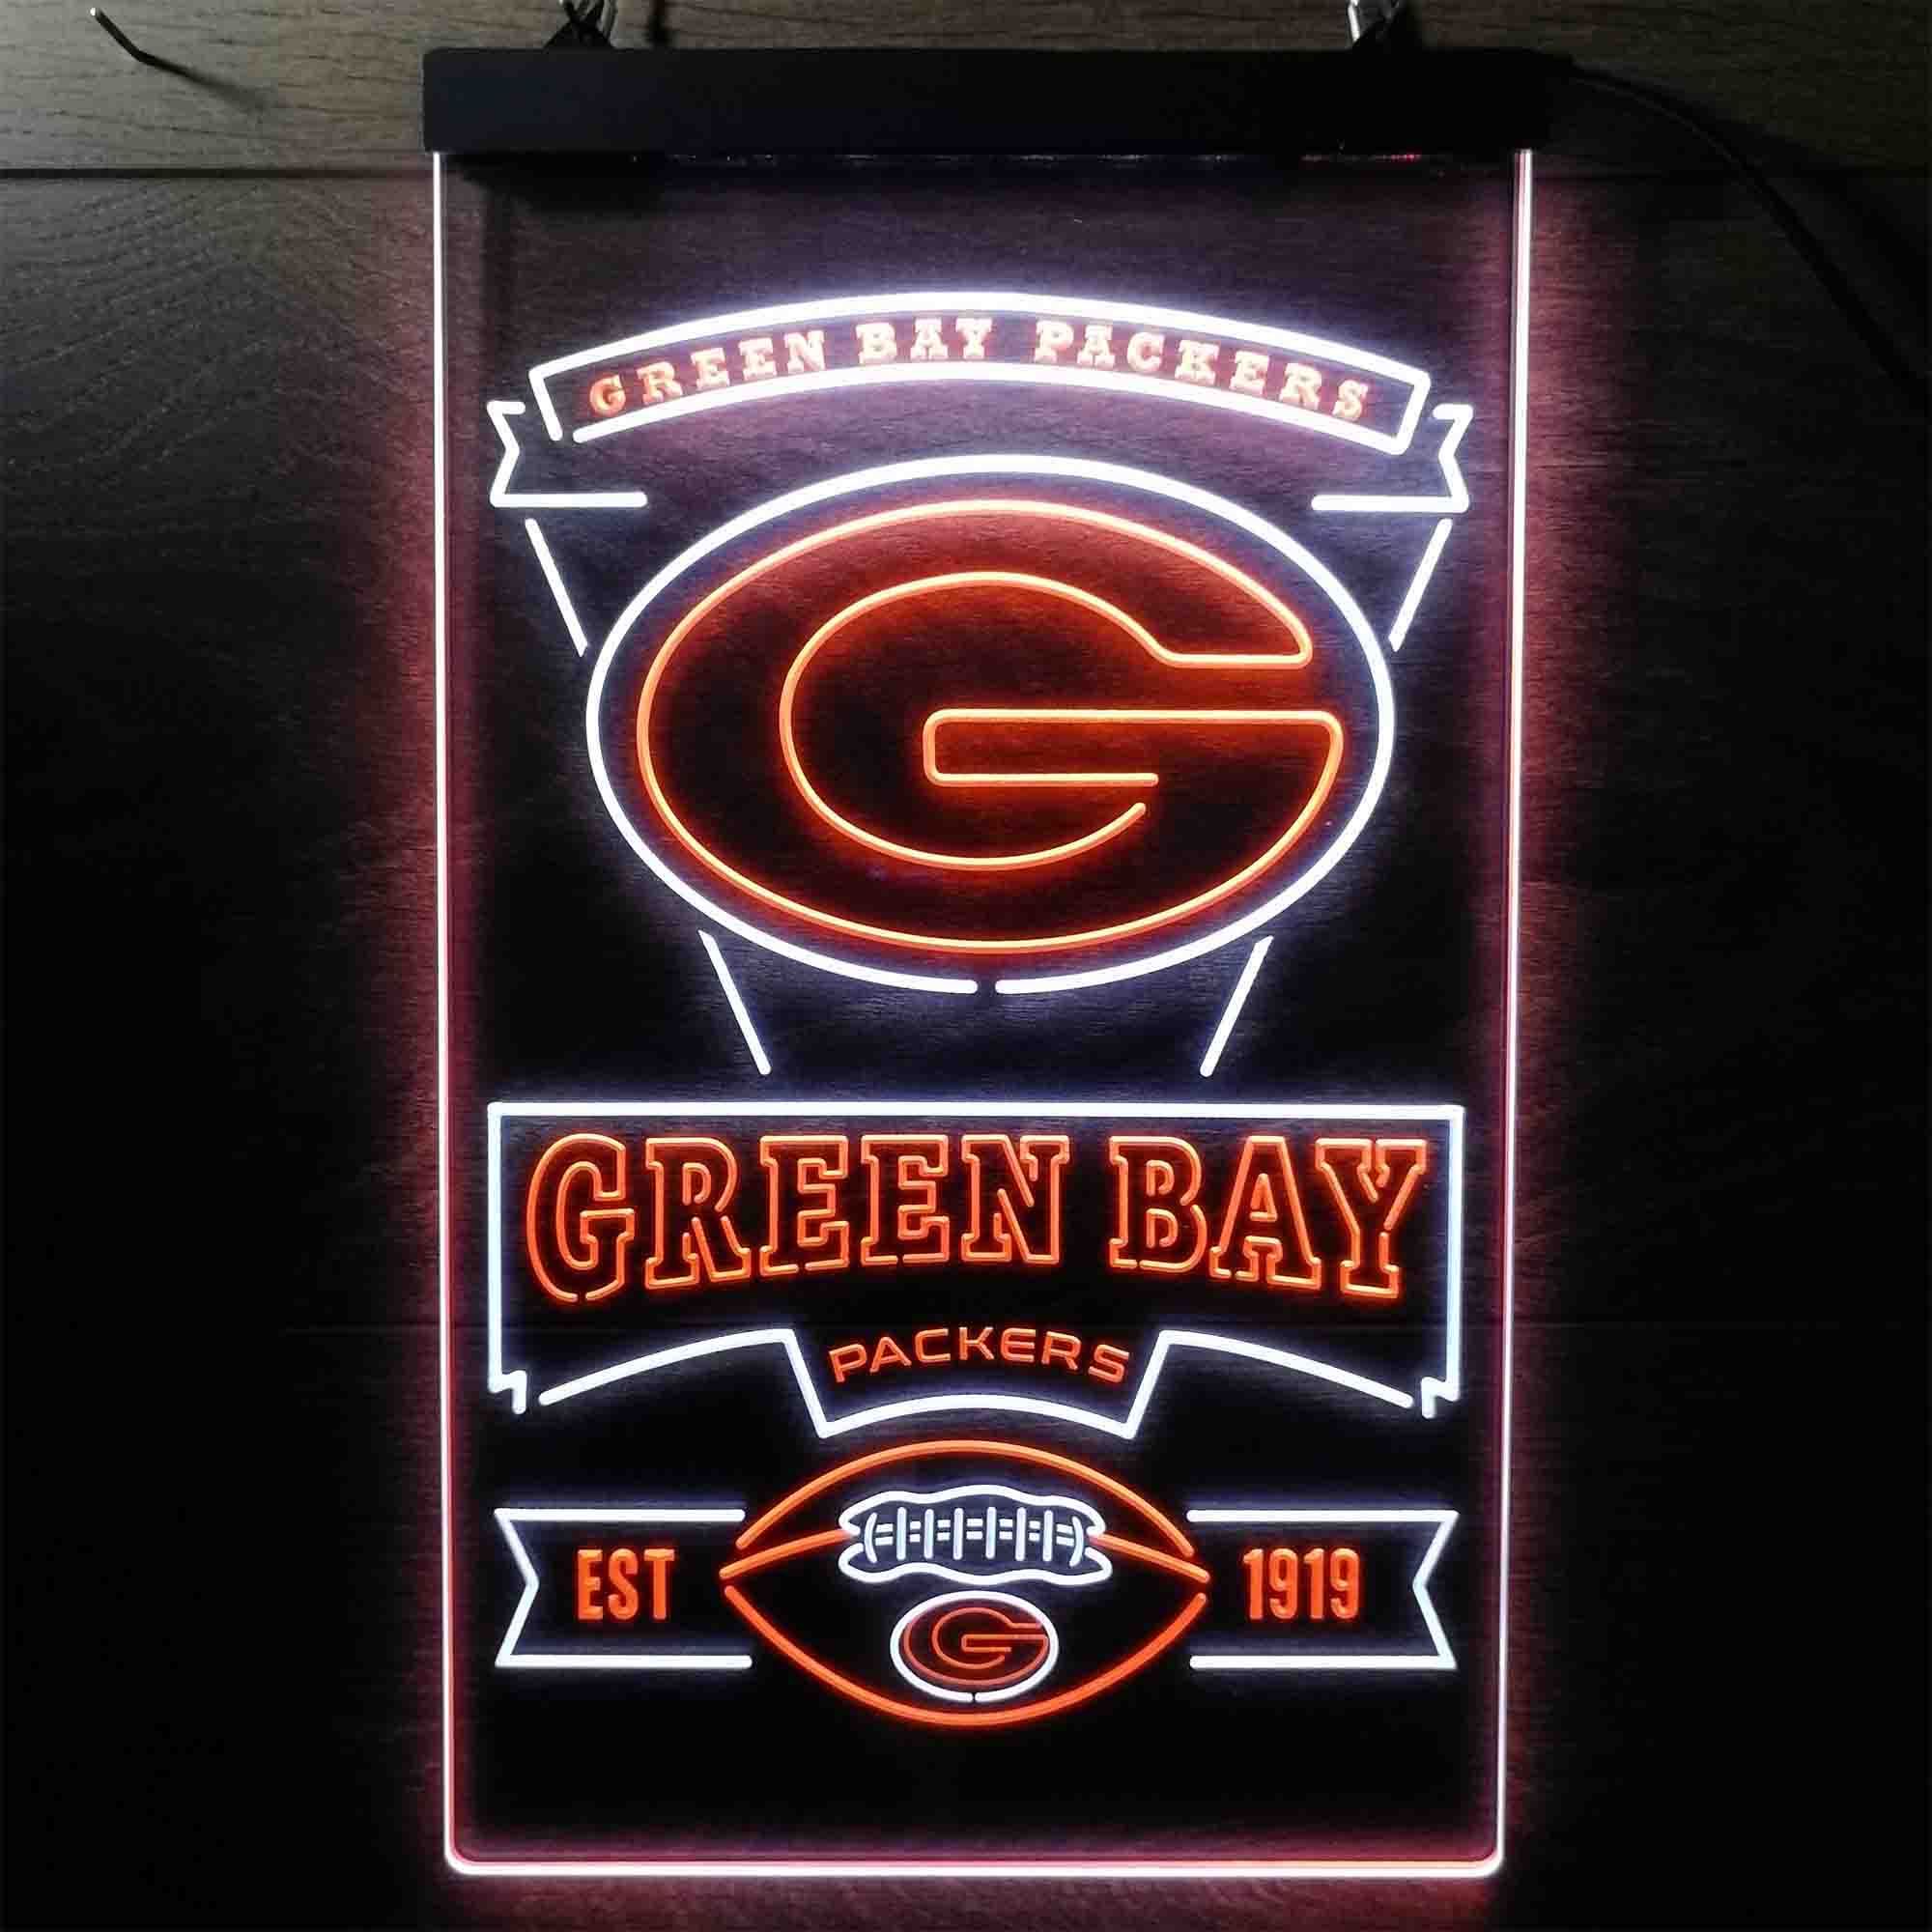 Green Bay Packers EST 1919 Neon LED Sign